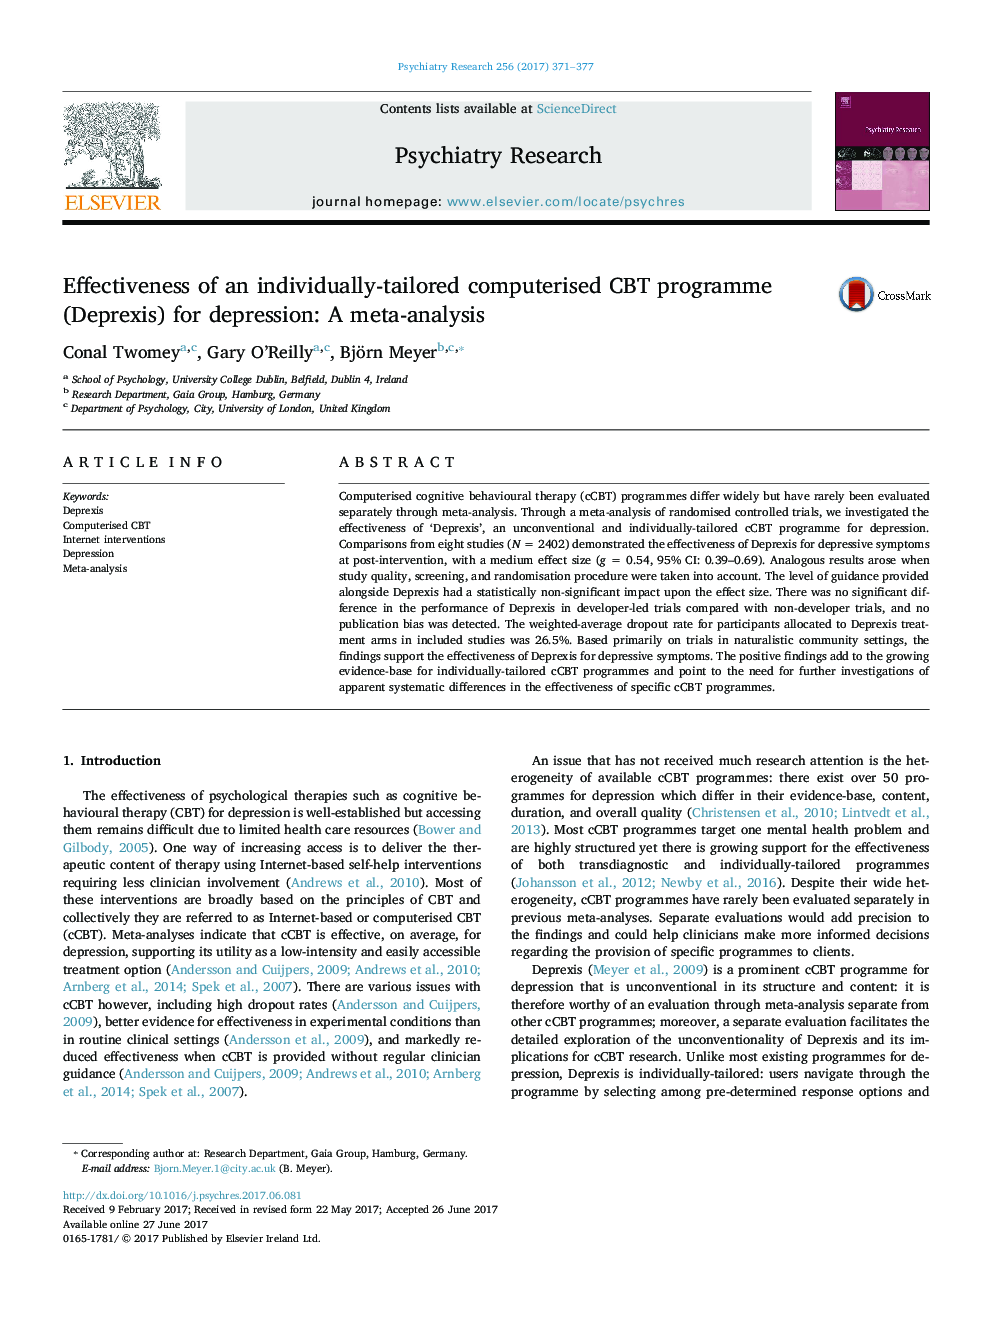 Effectiveness of an individually-tailored computerised CBT programme (Deprexis) for depression: A meta-analysis